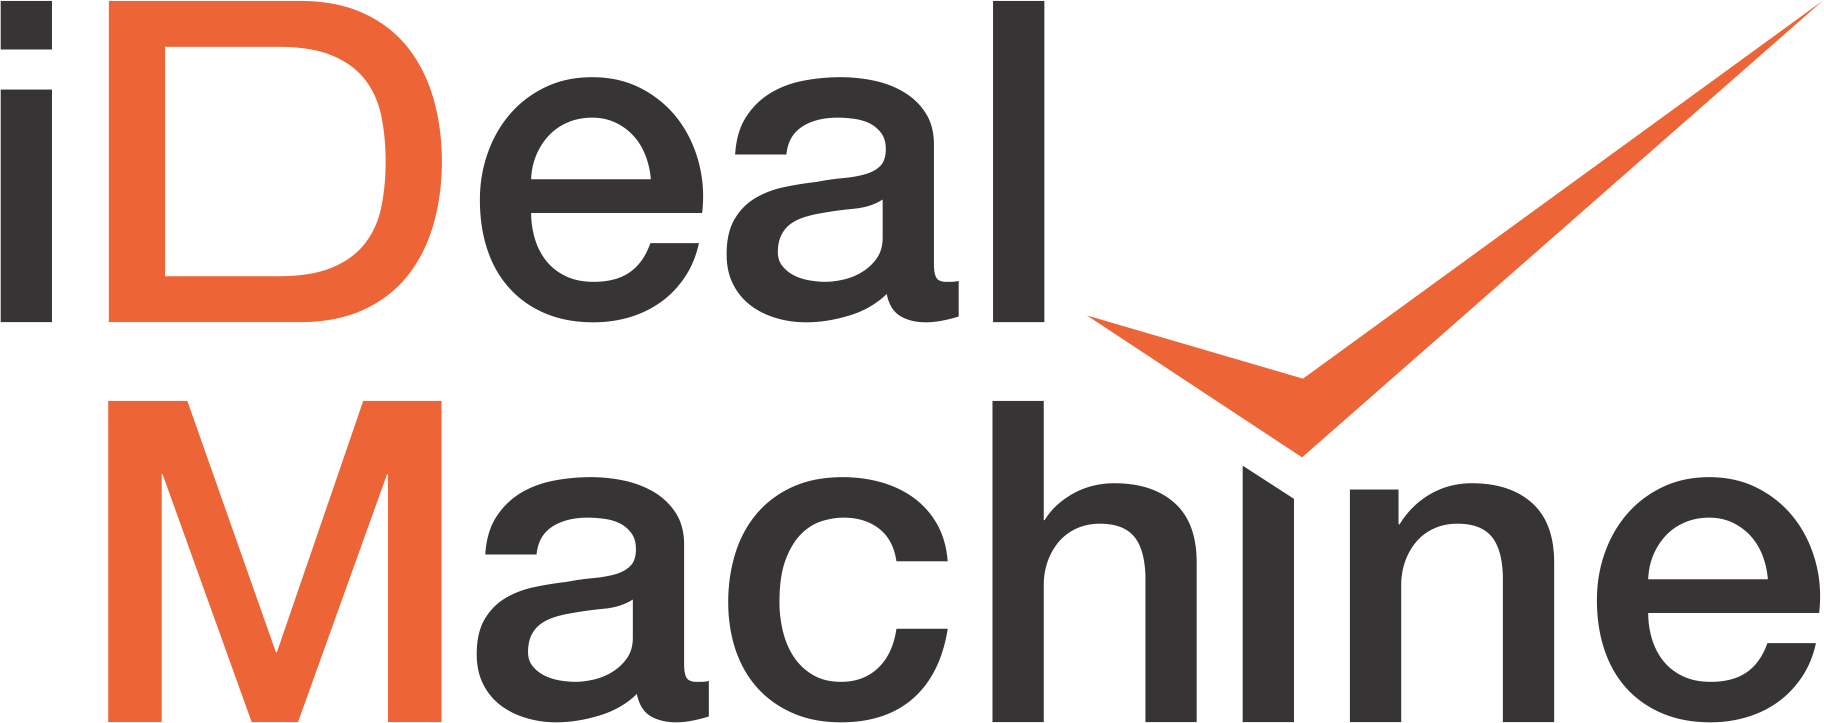 GoTech contest nominees will receive grants for participation in iDealMachine USA Landing program